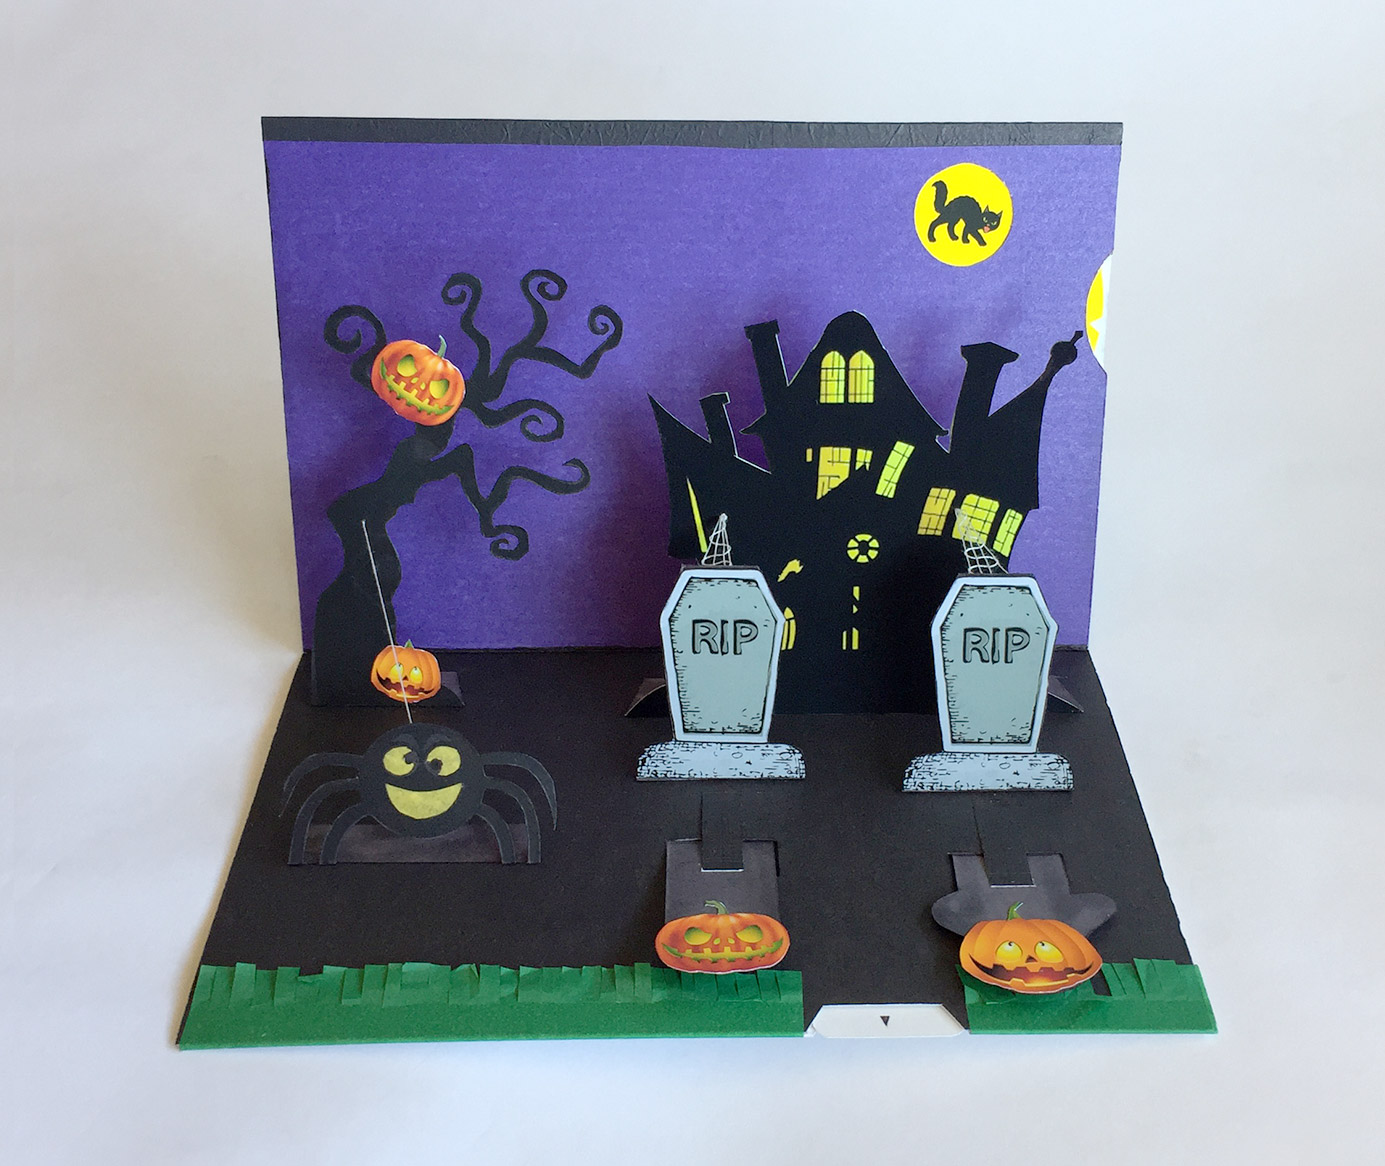 Inside of the card shows grave yard in front of haunted house